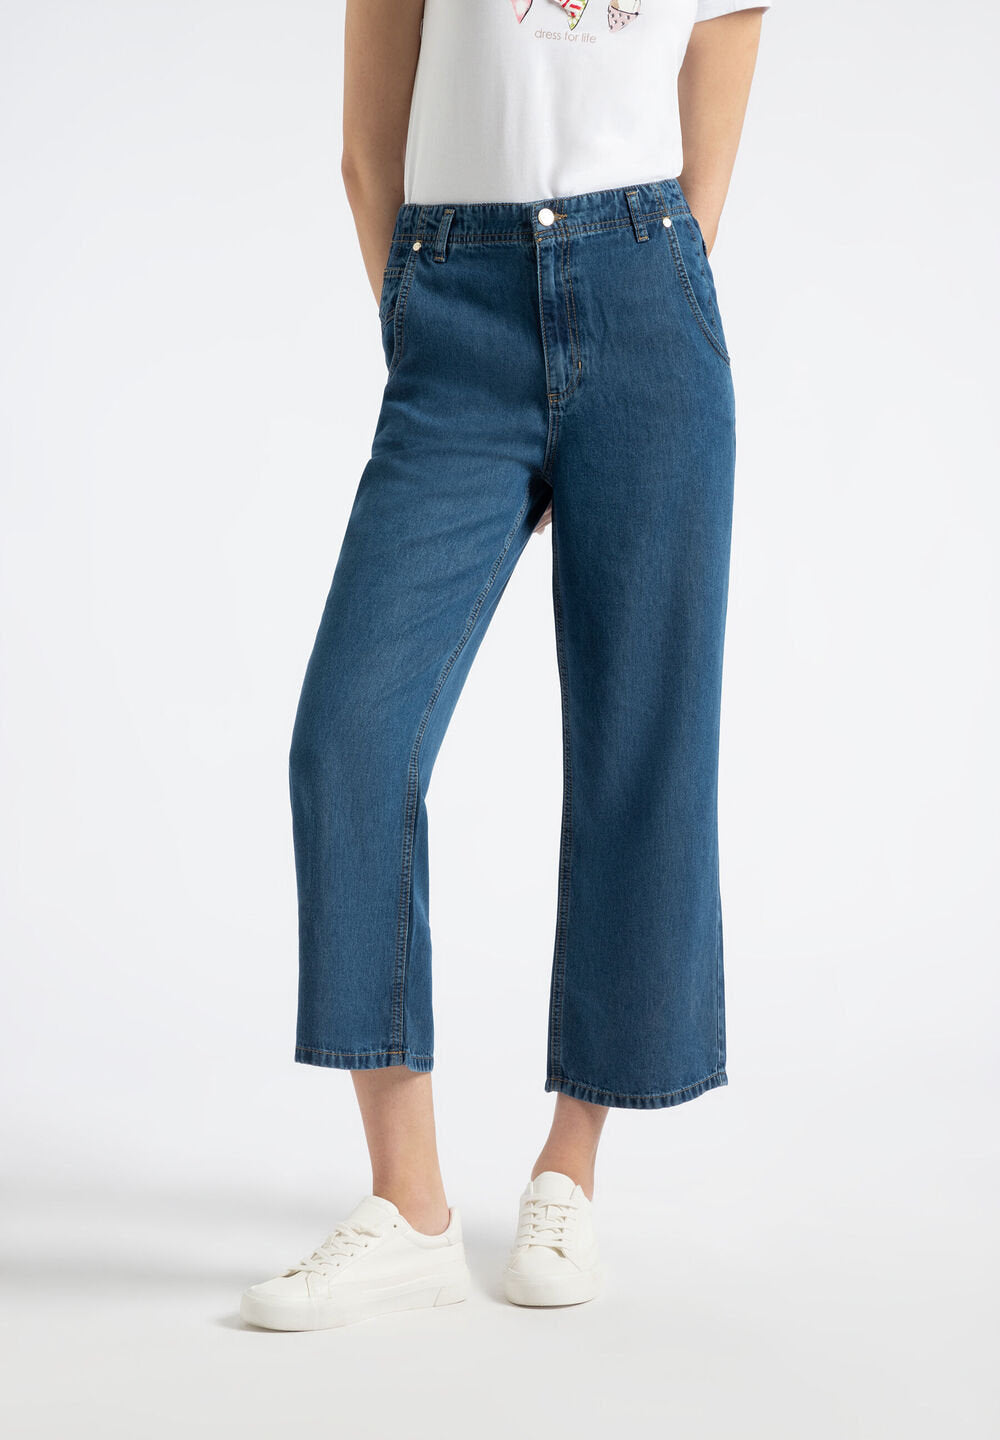 Jeans Culottes Style_41044256_0962_01